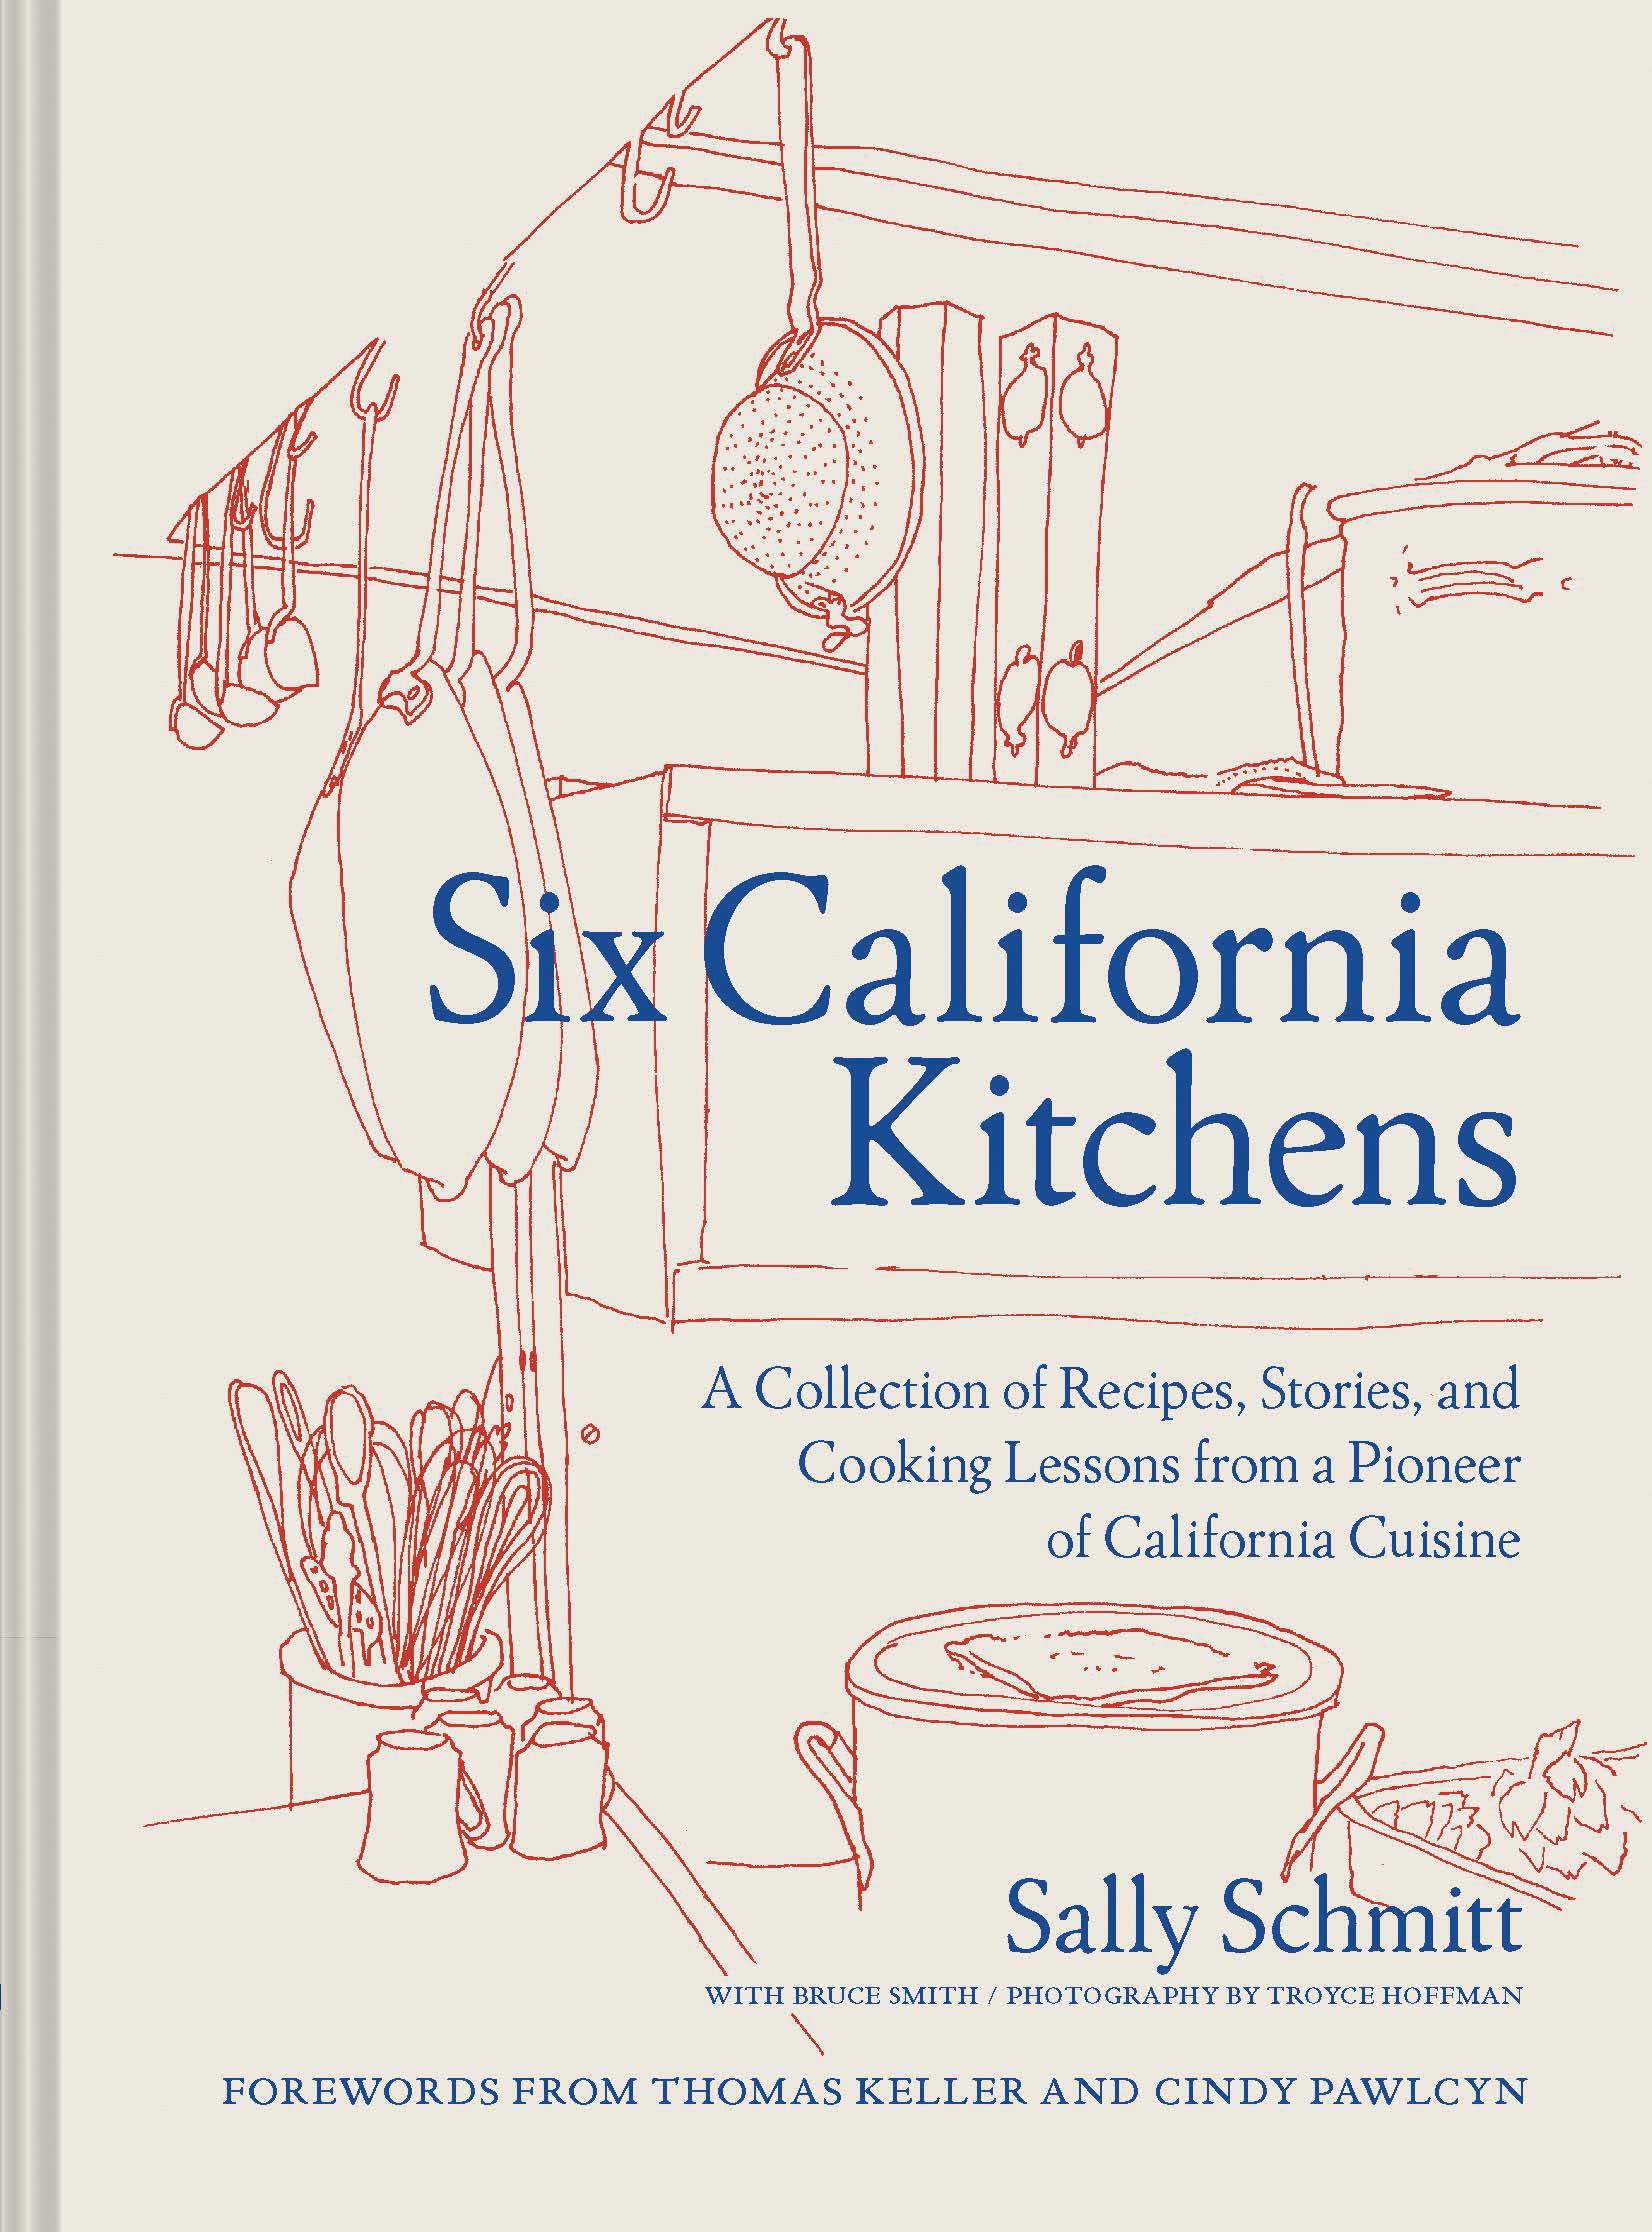 Six California Kitchens: A Collection of Recipes, Stories, and Cooking Lessons from a Pioneer of California Cuisine (Sally Schmitt, Bruce Smith)